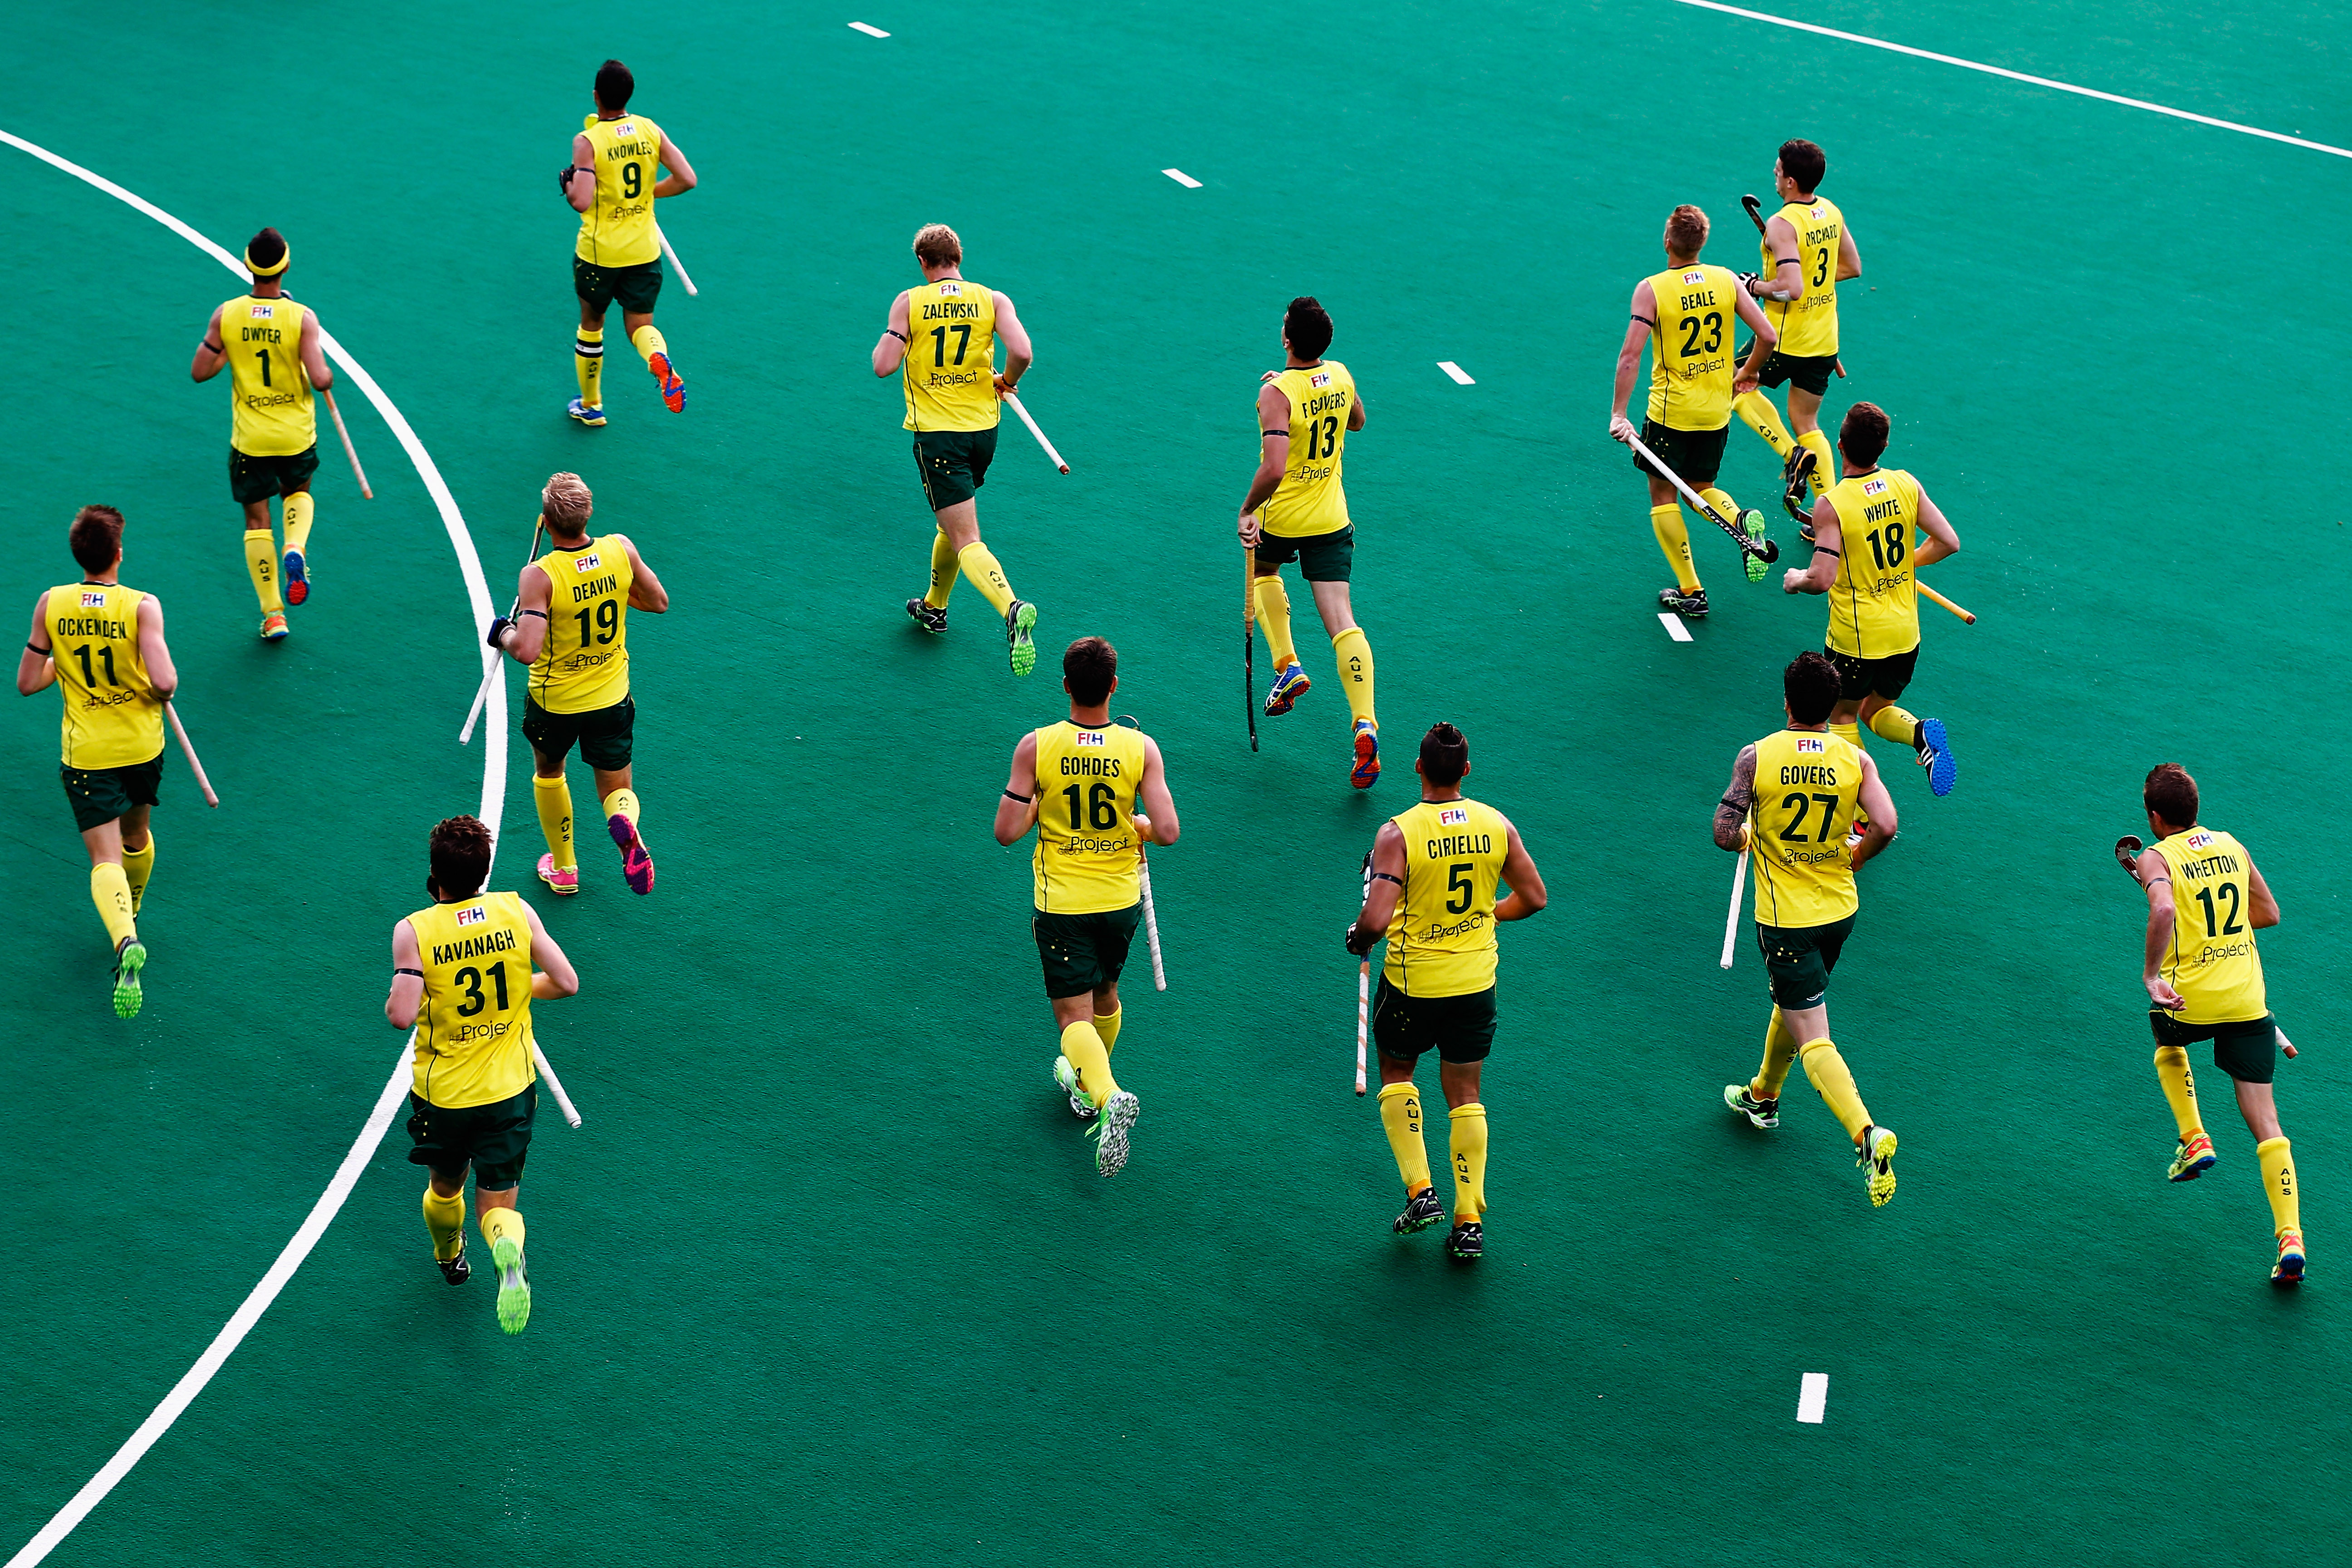 Rio 2016 | Preview of all the 12 hockey teams headed for Olympics